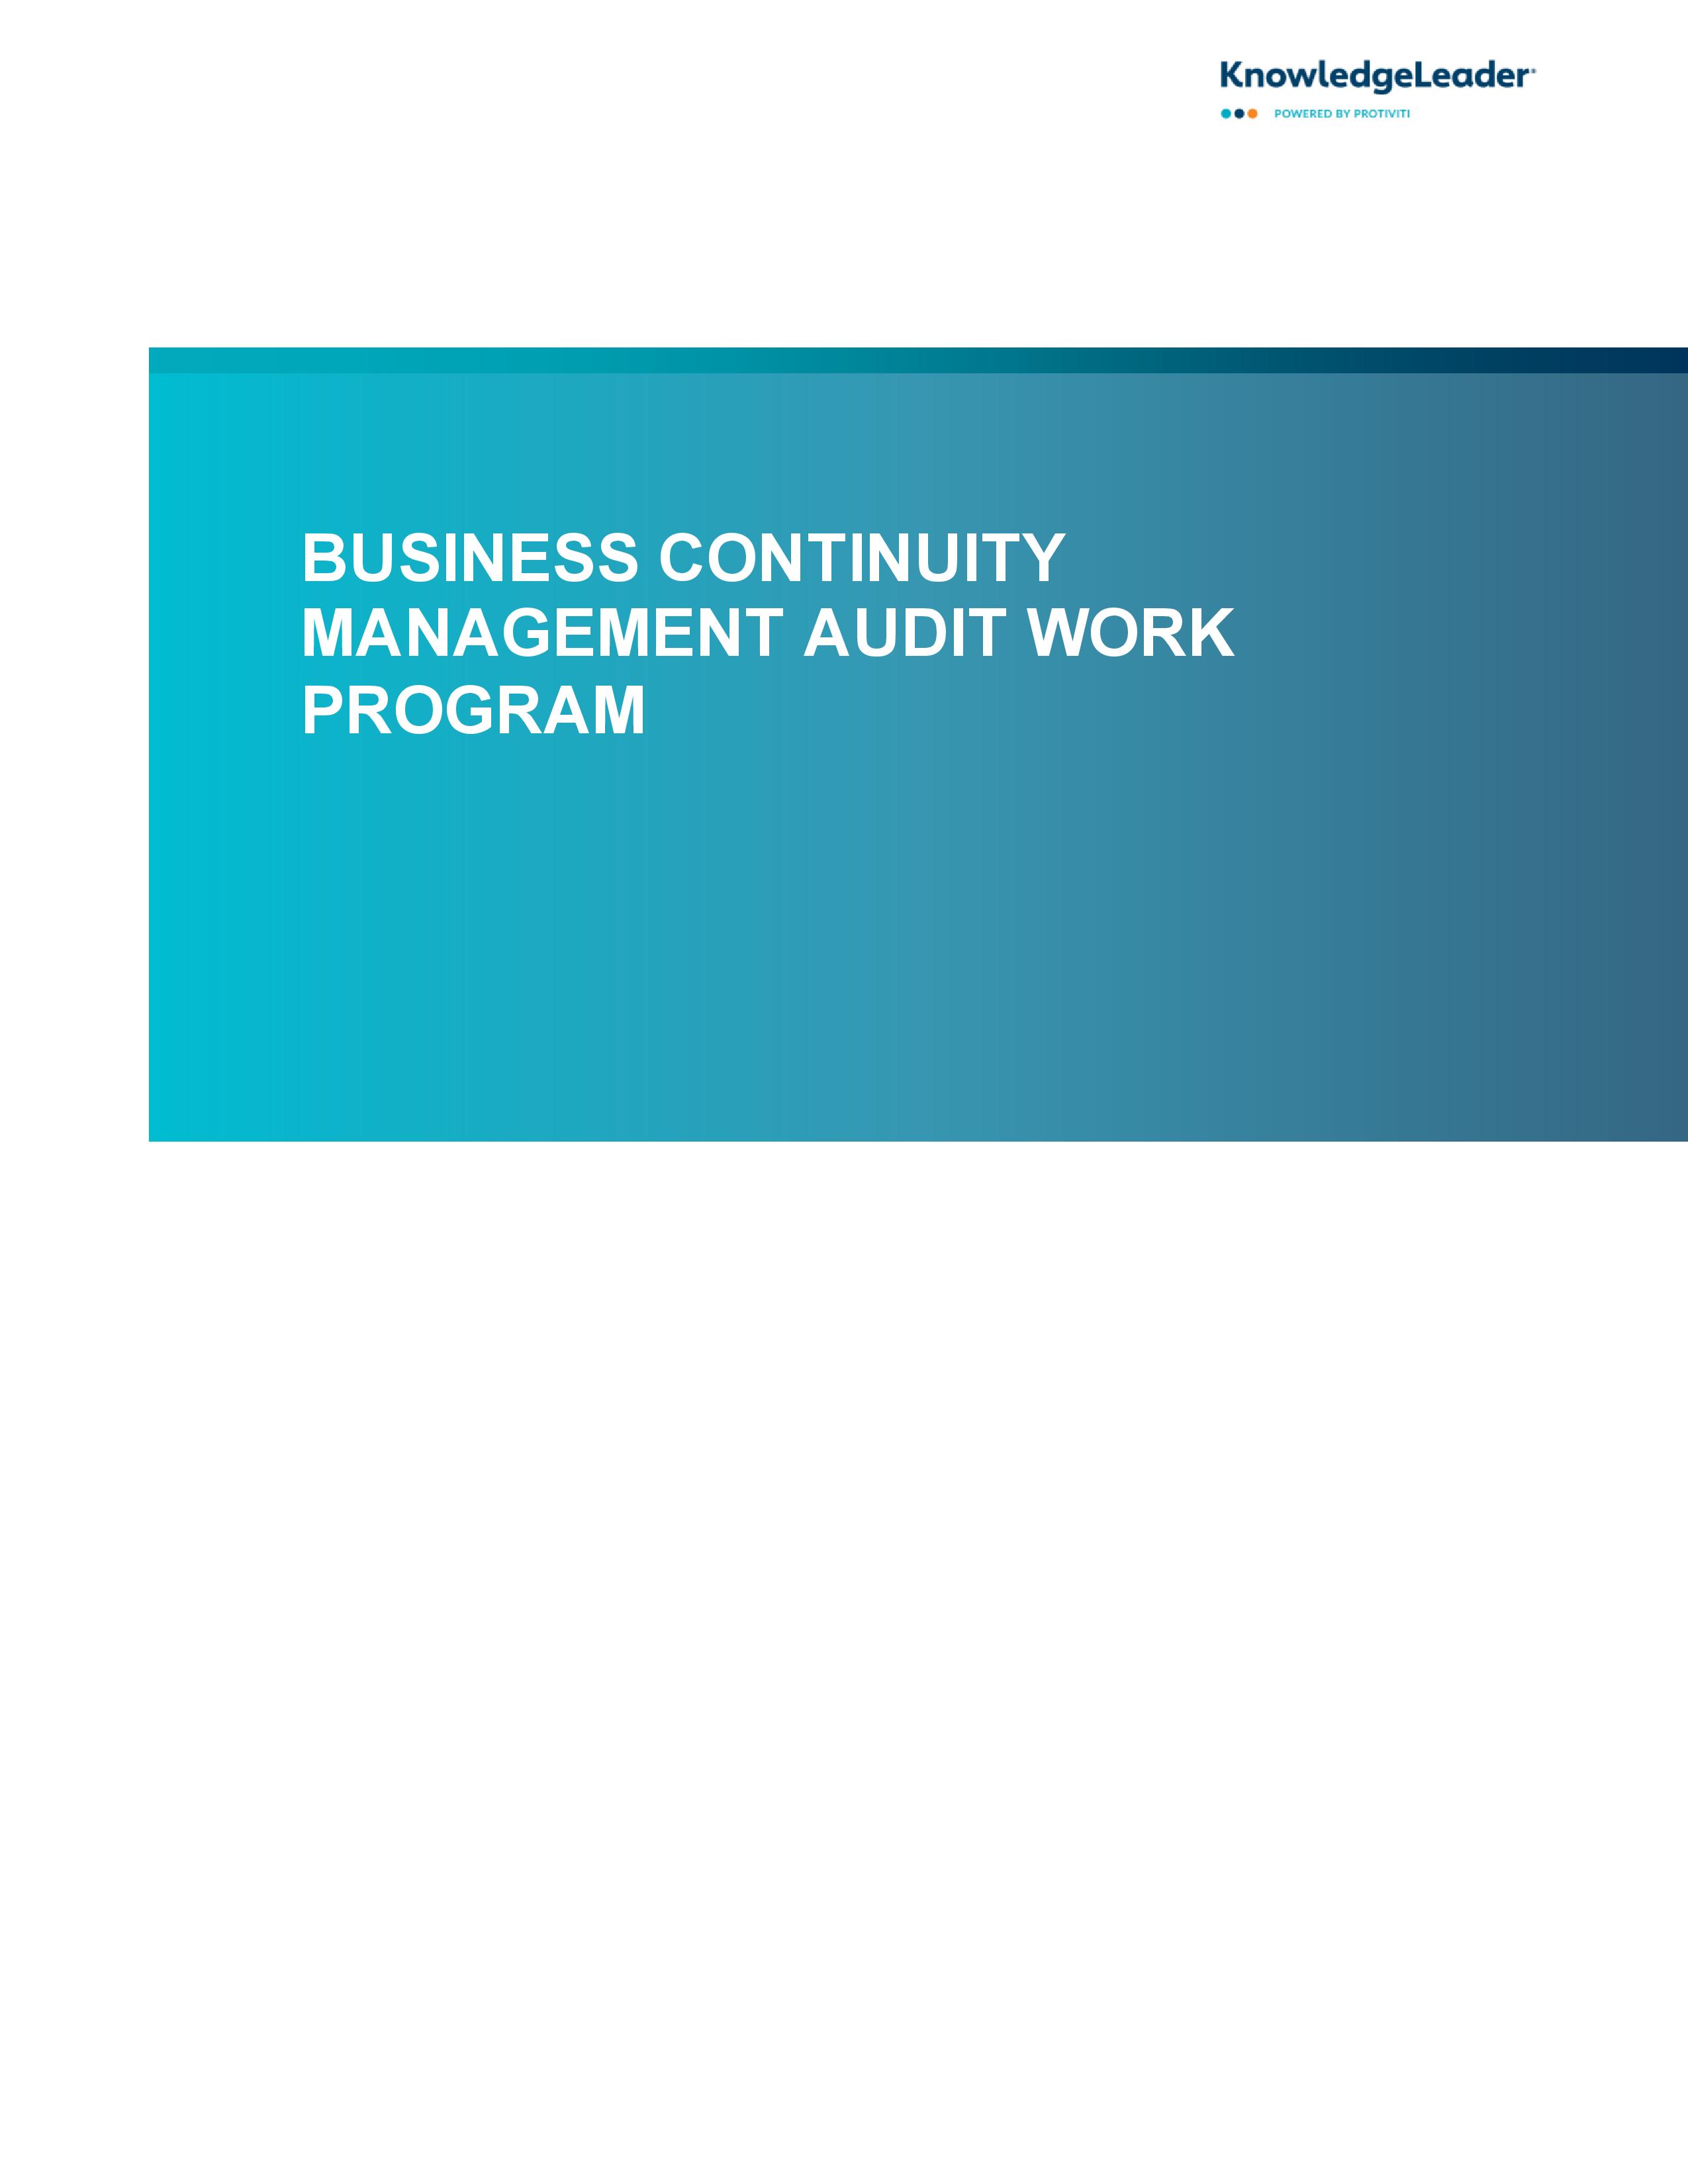 Screenshot of the first page of Business Continuity Management Audit Work Program